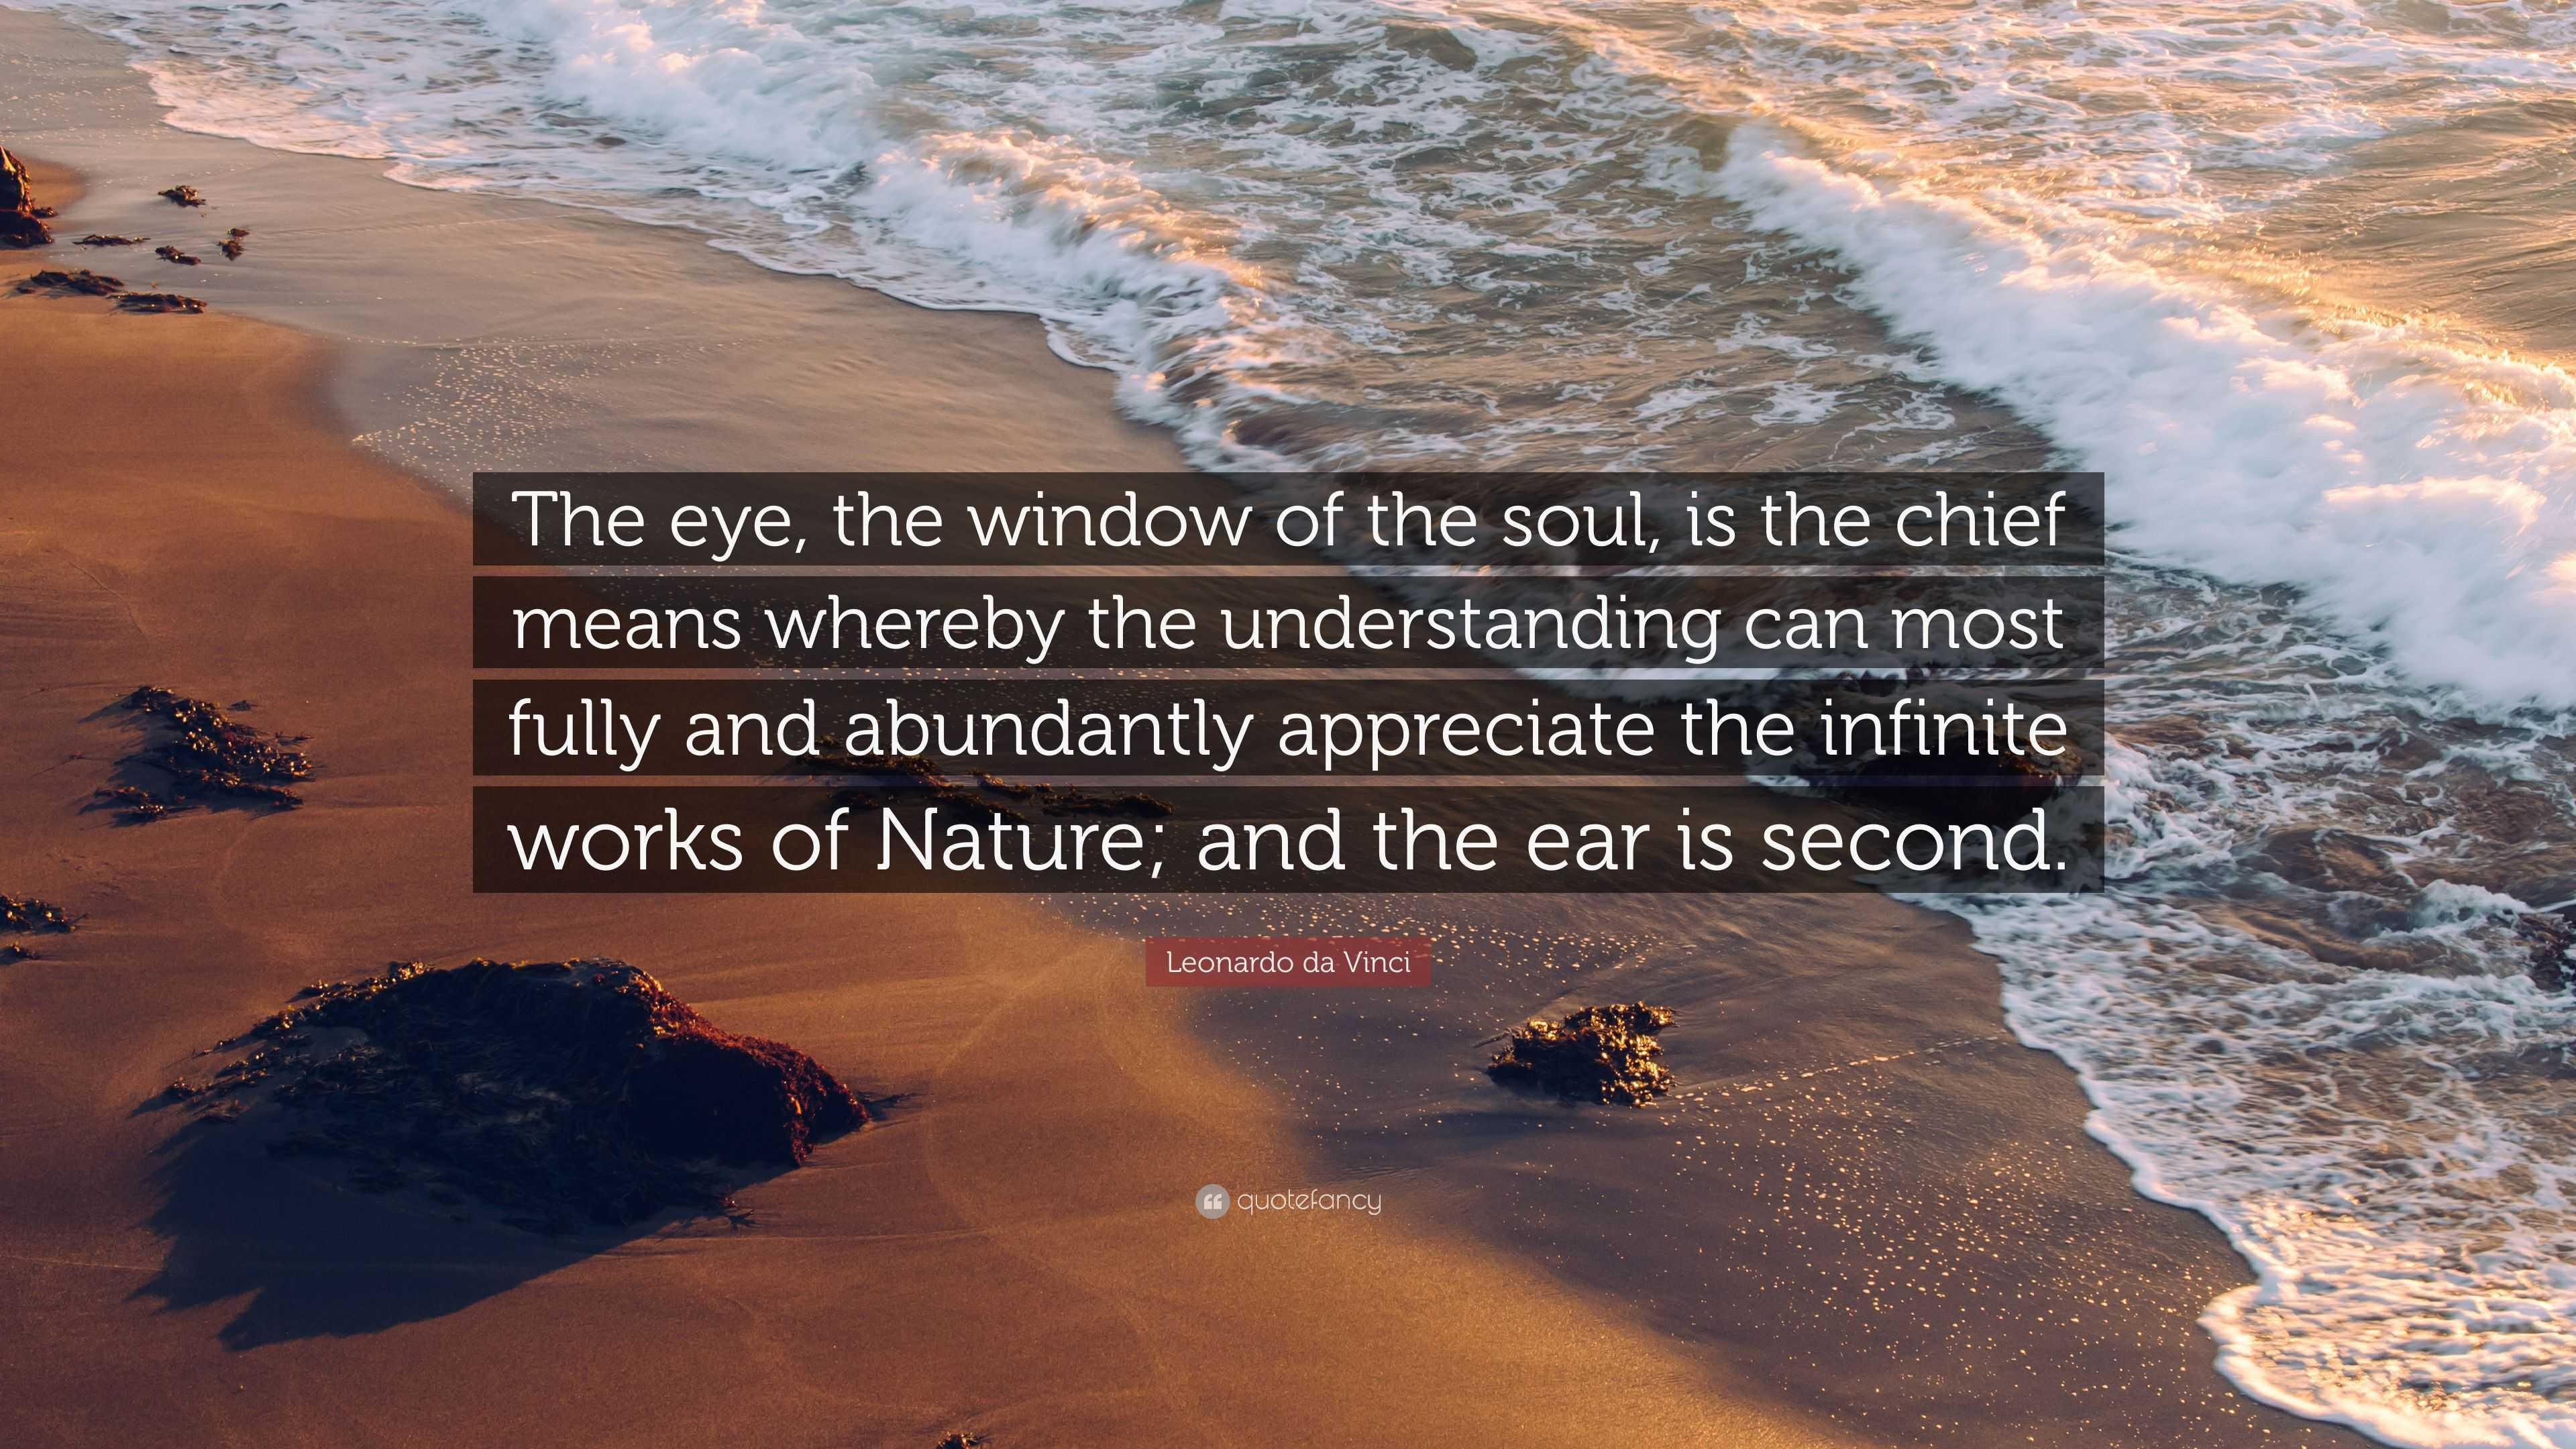 Windows of the Soul: A Look at Dreams and Their Meanings